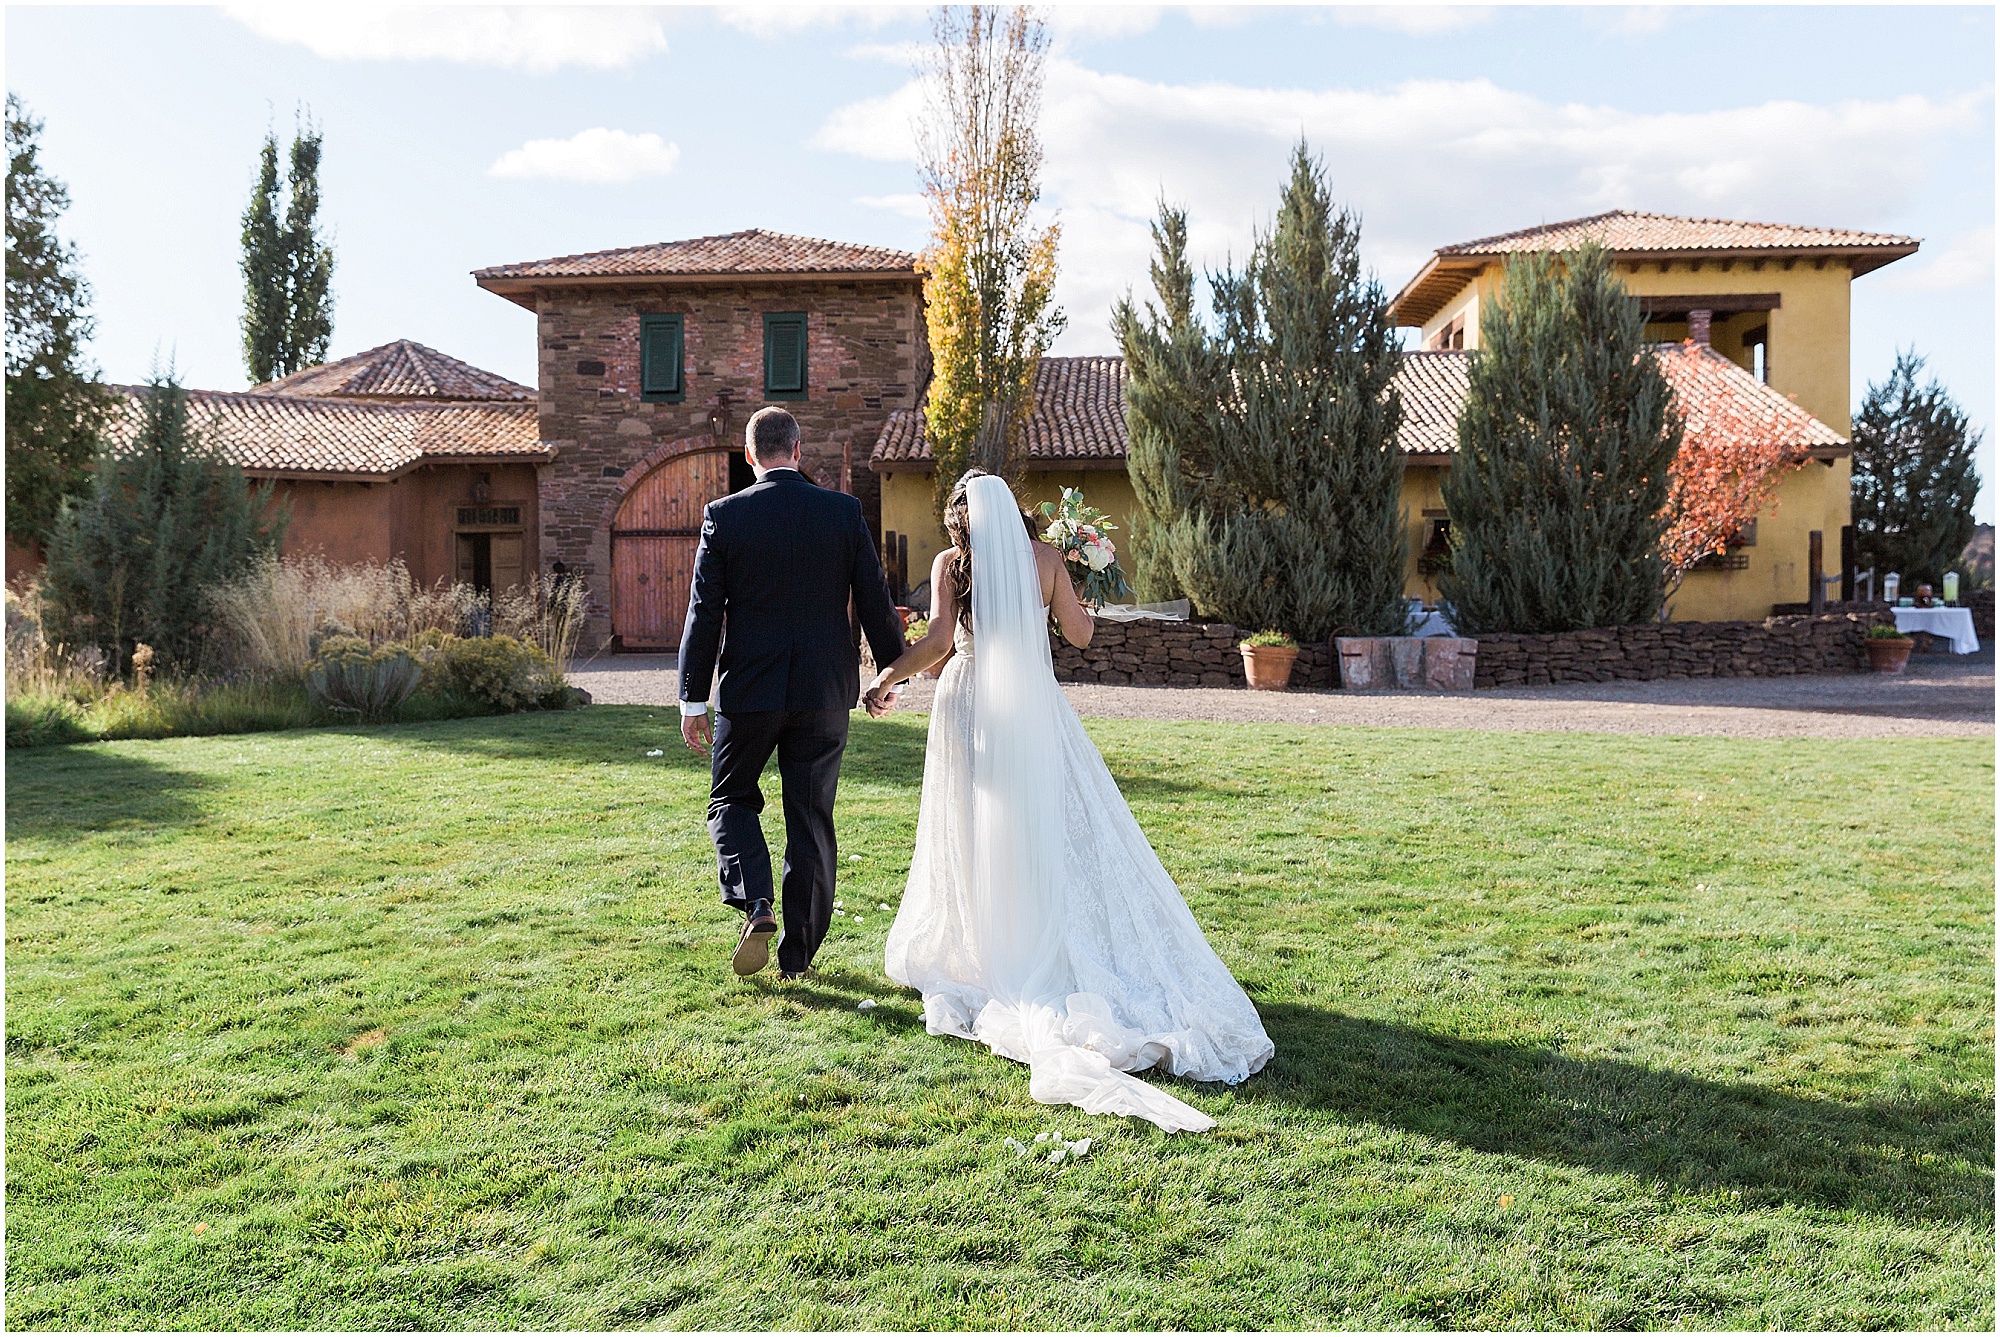 A stunning view of the Tuscan Stables wedding venue at Ranch at the Canyons in Terrebonne, Oregon near Smith Rock. | Erica Swantek Photography